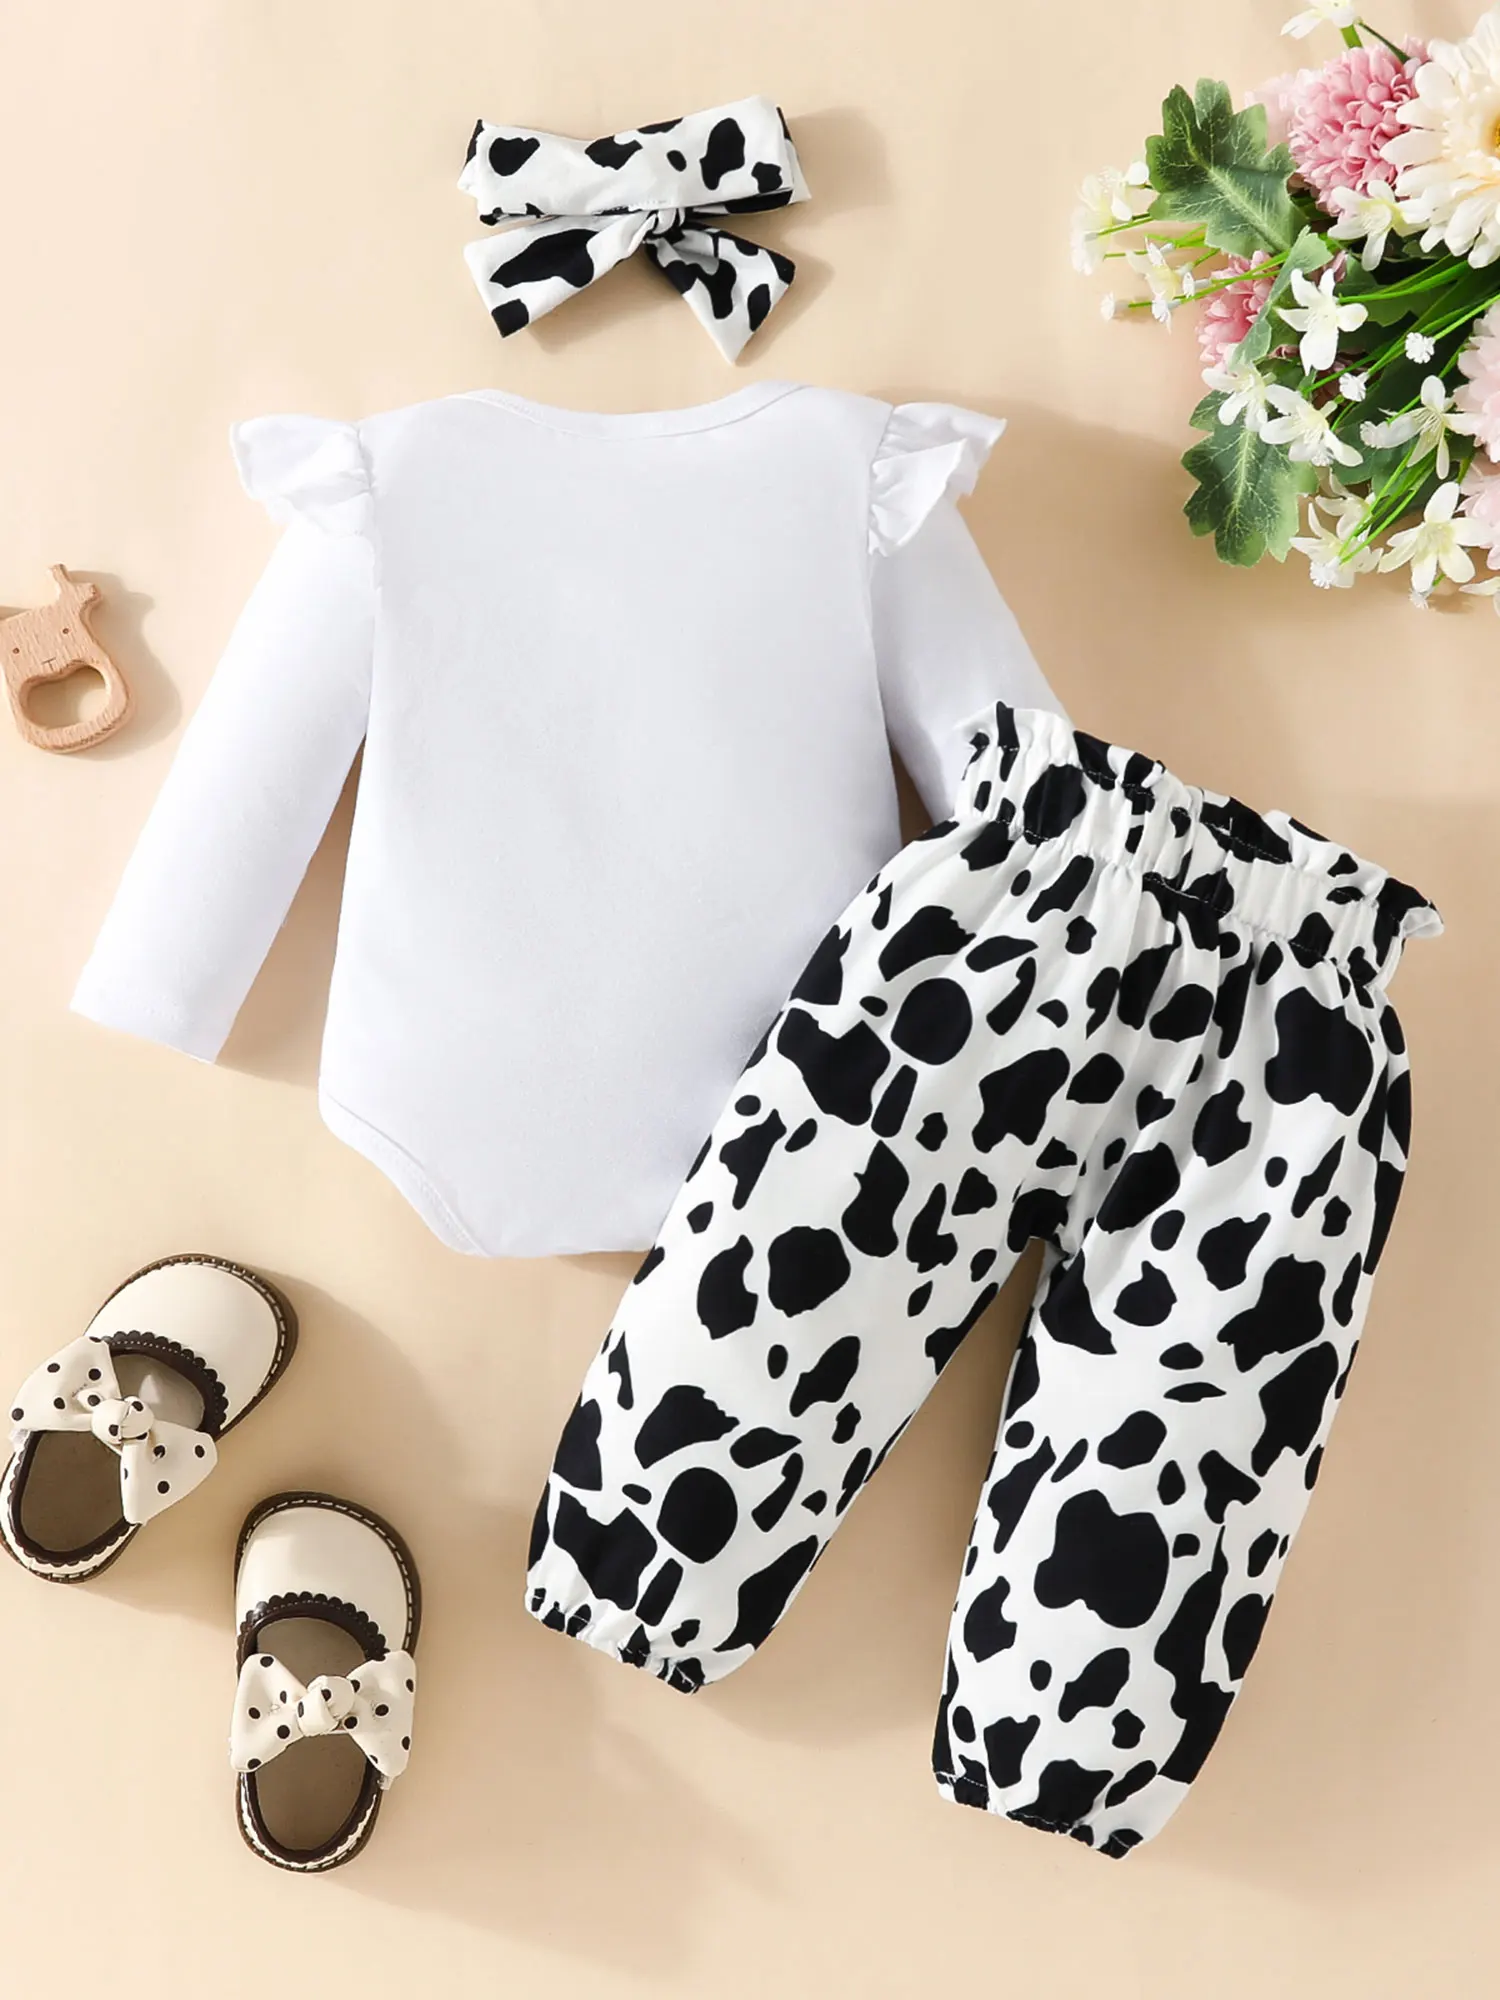 

Adorable Infant Girl Cow Print Outfit with Ruffled Sleeves Mama s Little Cow Romper and Cozy Harem Pants - Perfect for Fall